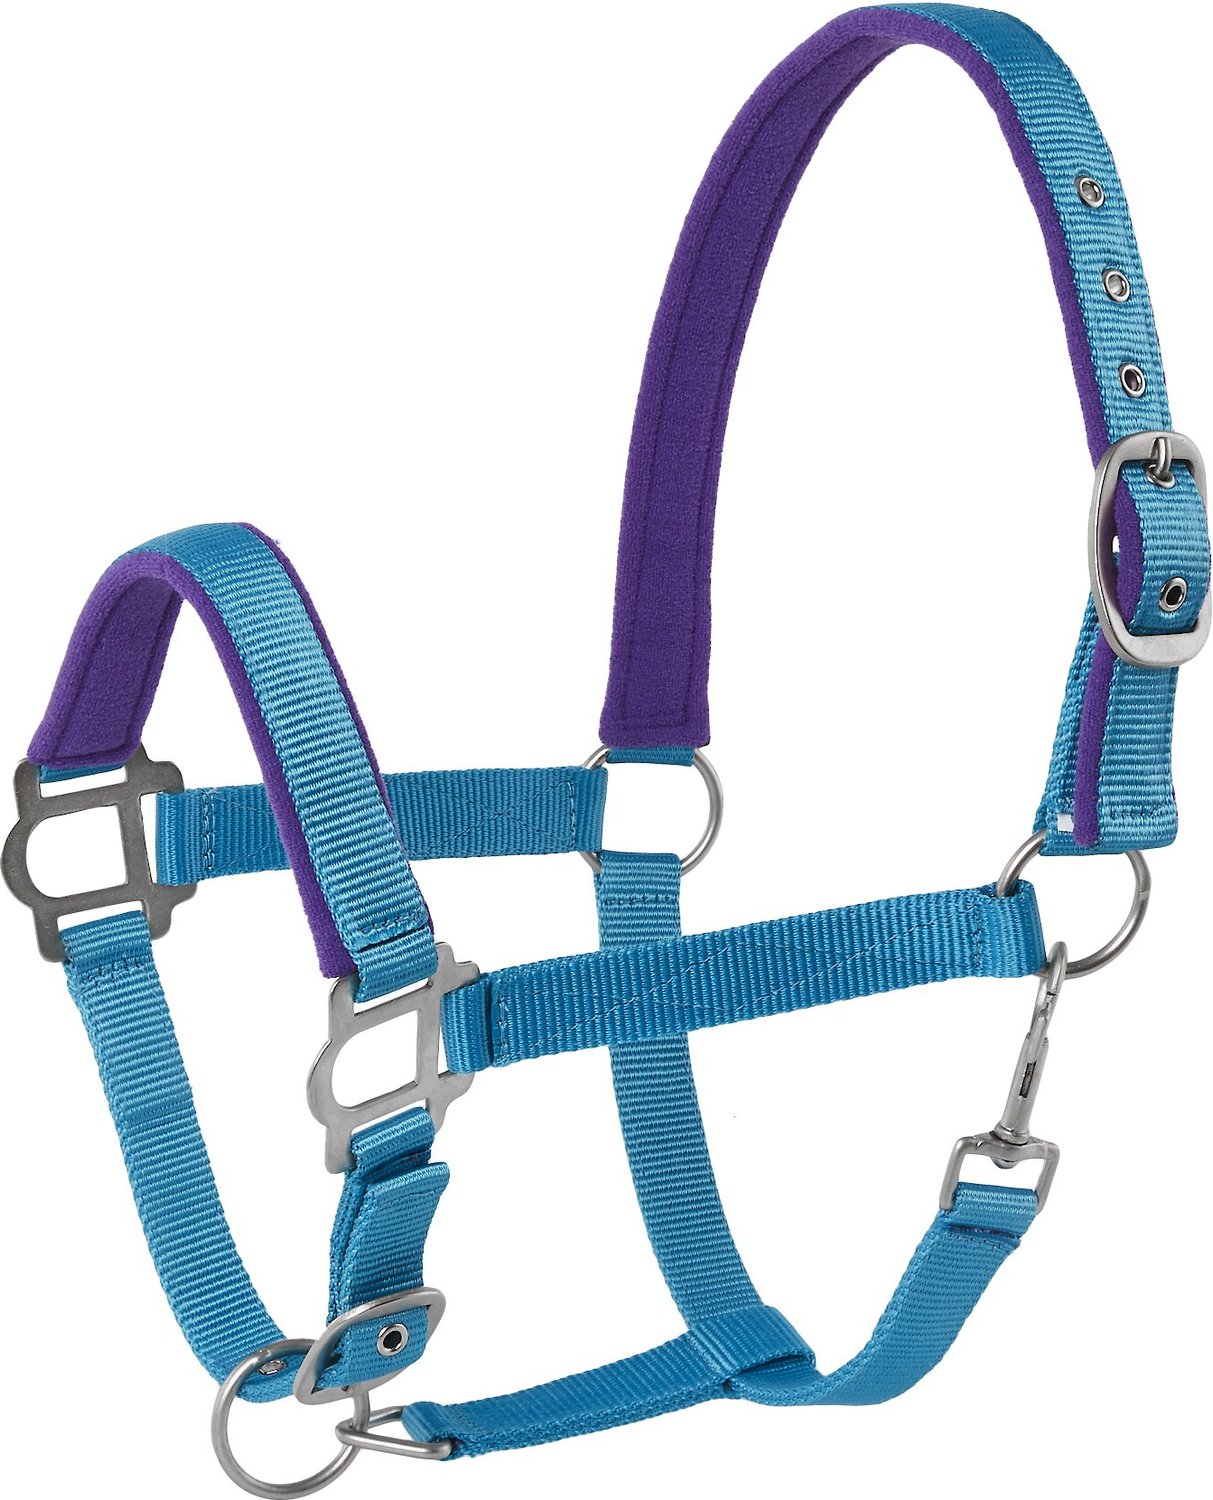 Full Equipride Horse Print Fur Padded Nylon Headcollars with Lead Rope Royal Blue